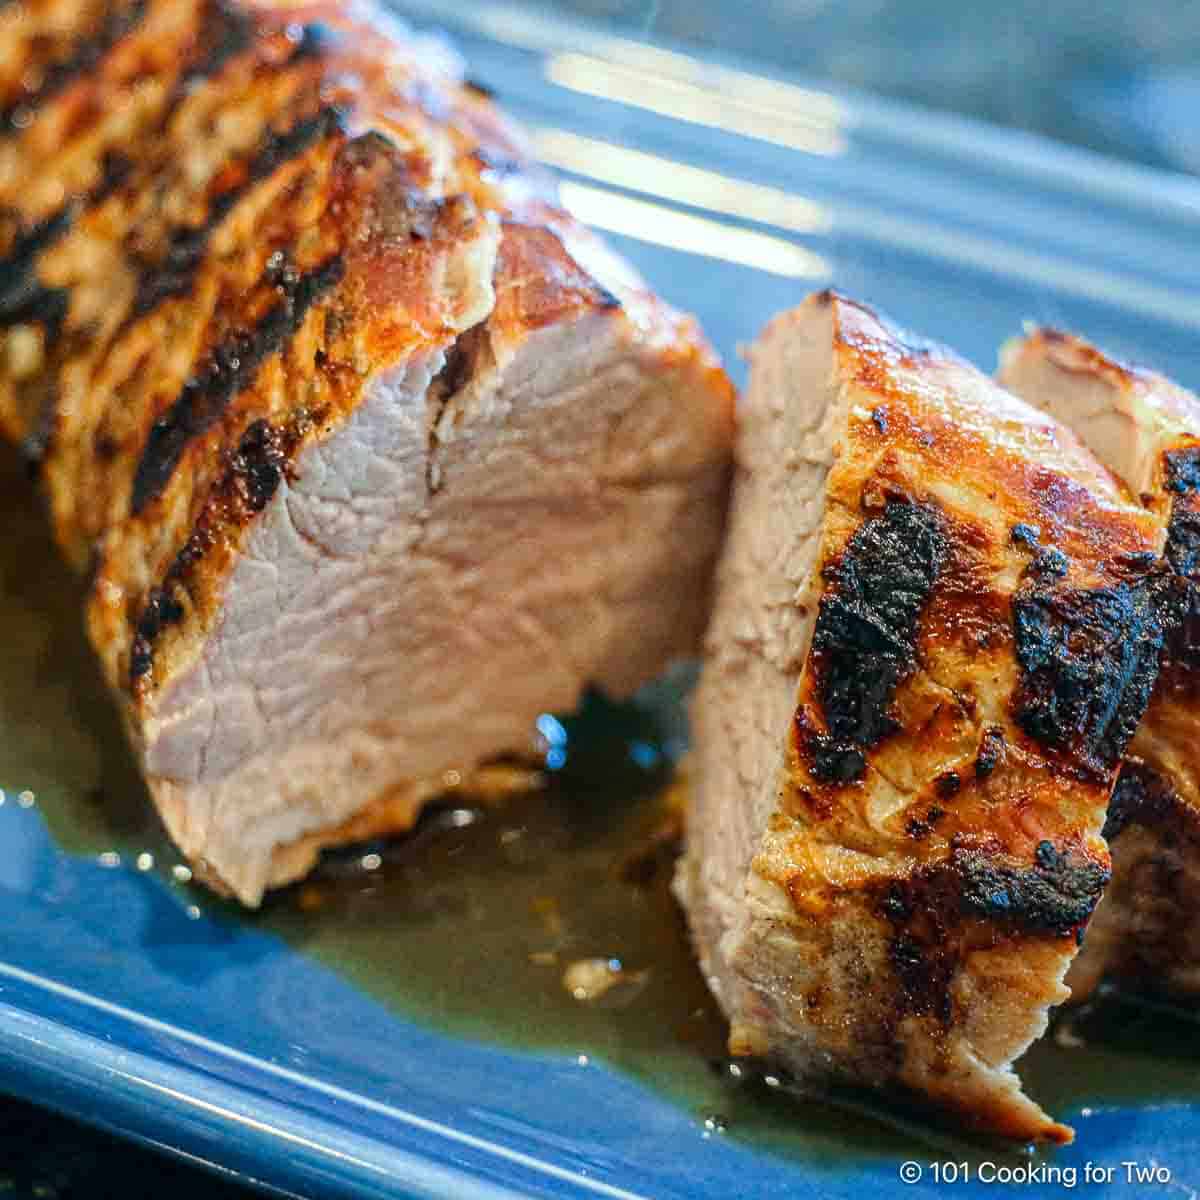 How To Grill A Pork Tenderloin On A Gas Grill 101 Cooking For Two,Accent Wall Ideas For Master Bedroom